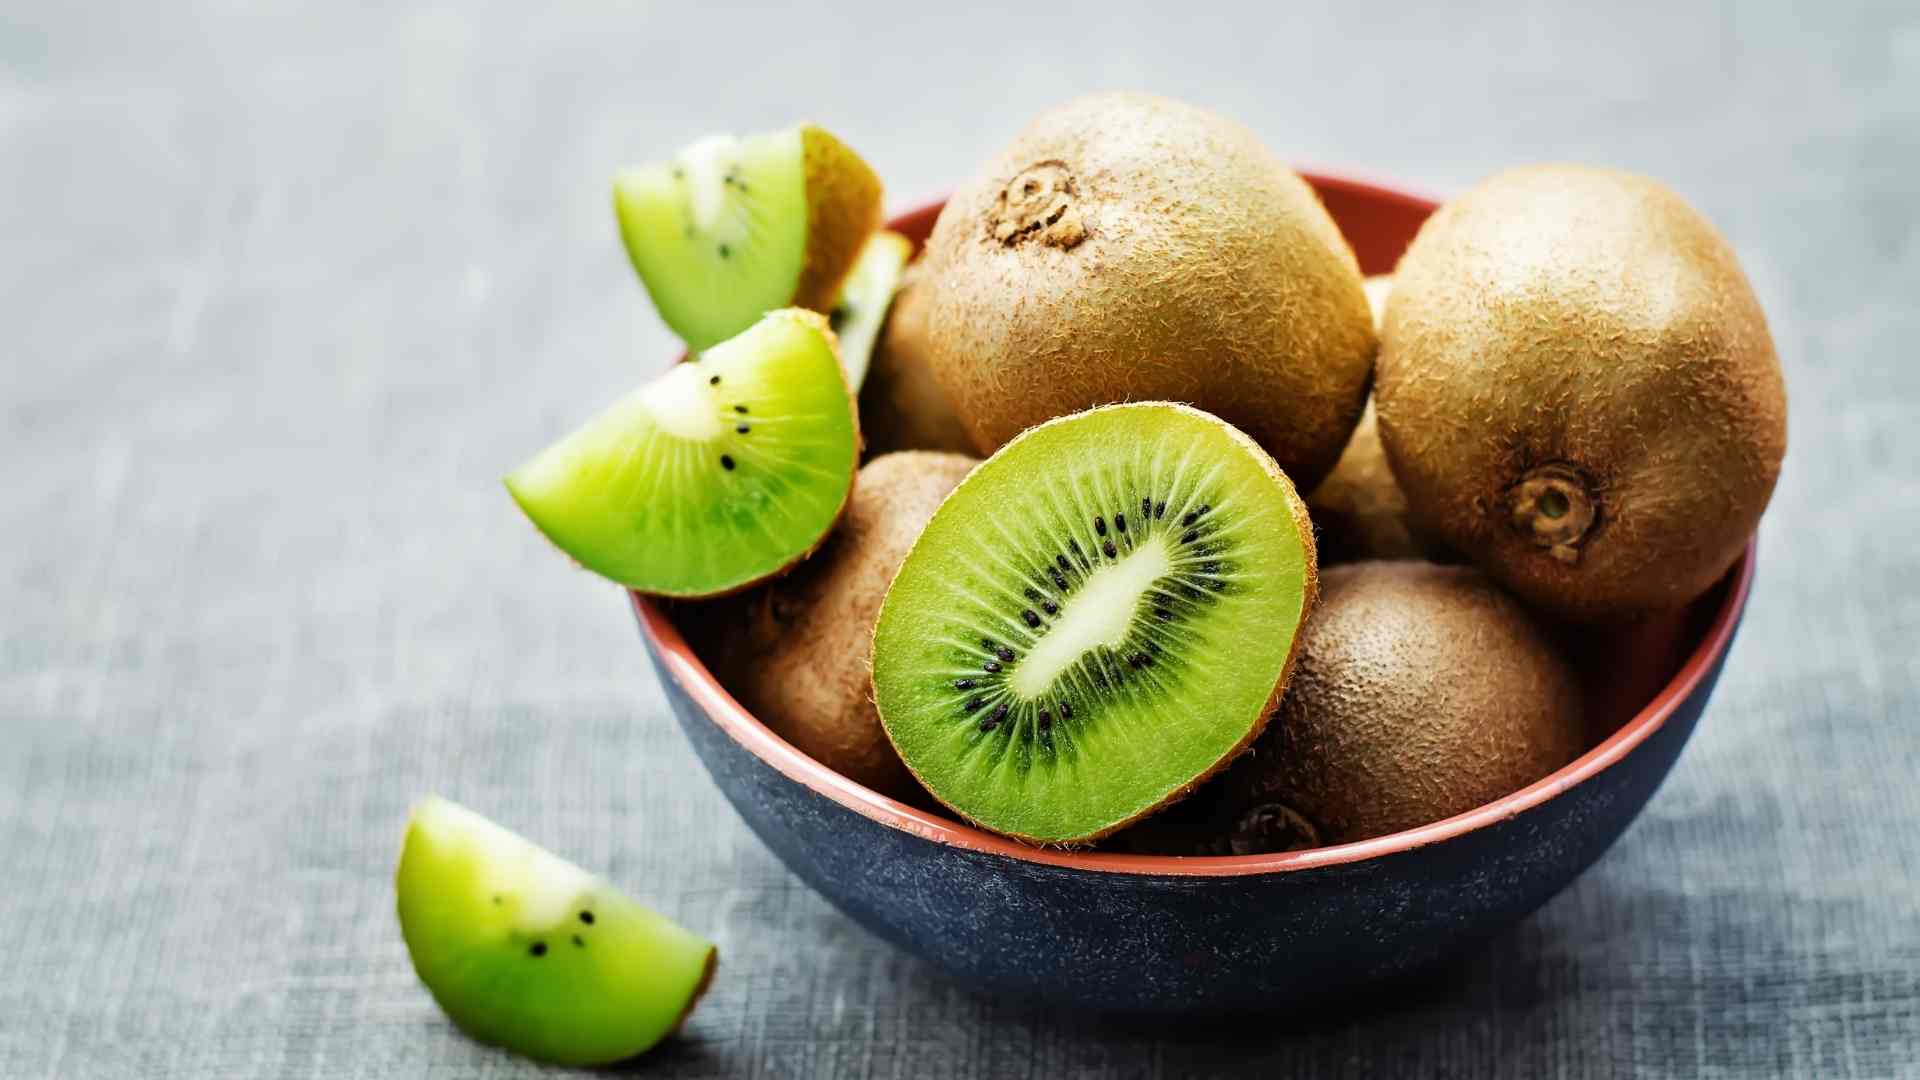 Benefits Of Kiwi – 11 Reasons To Start Eating This Superfood Every Day